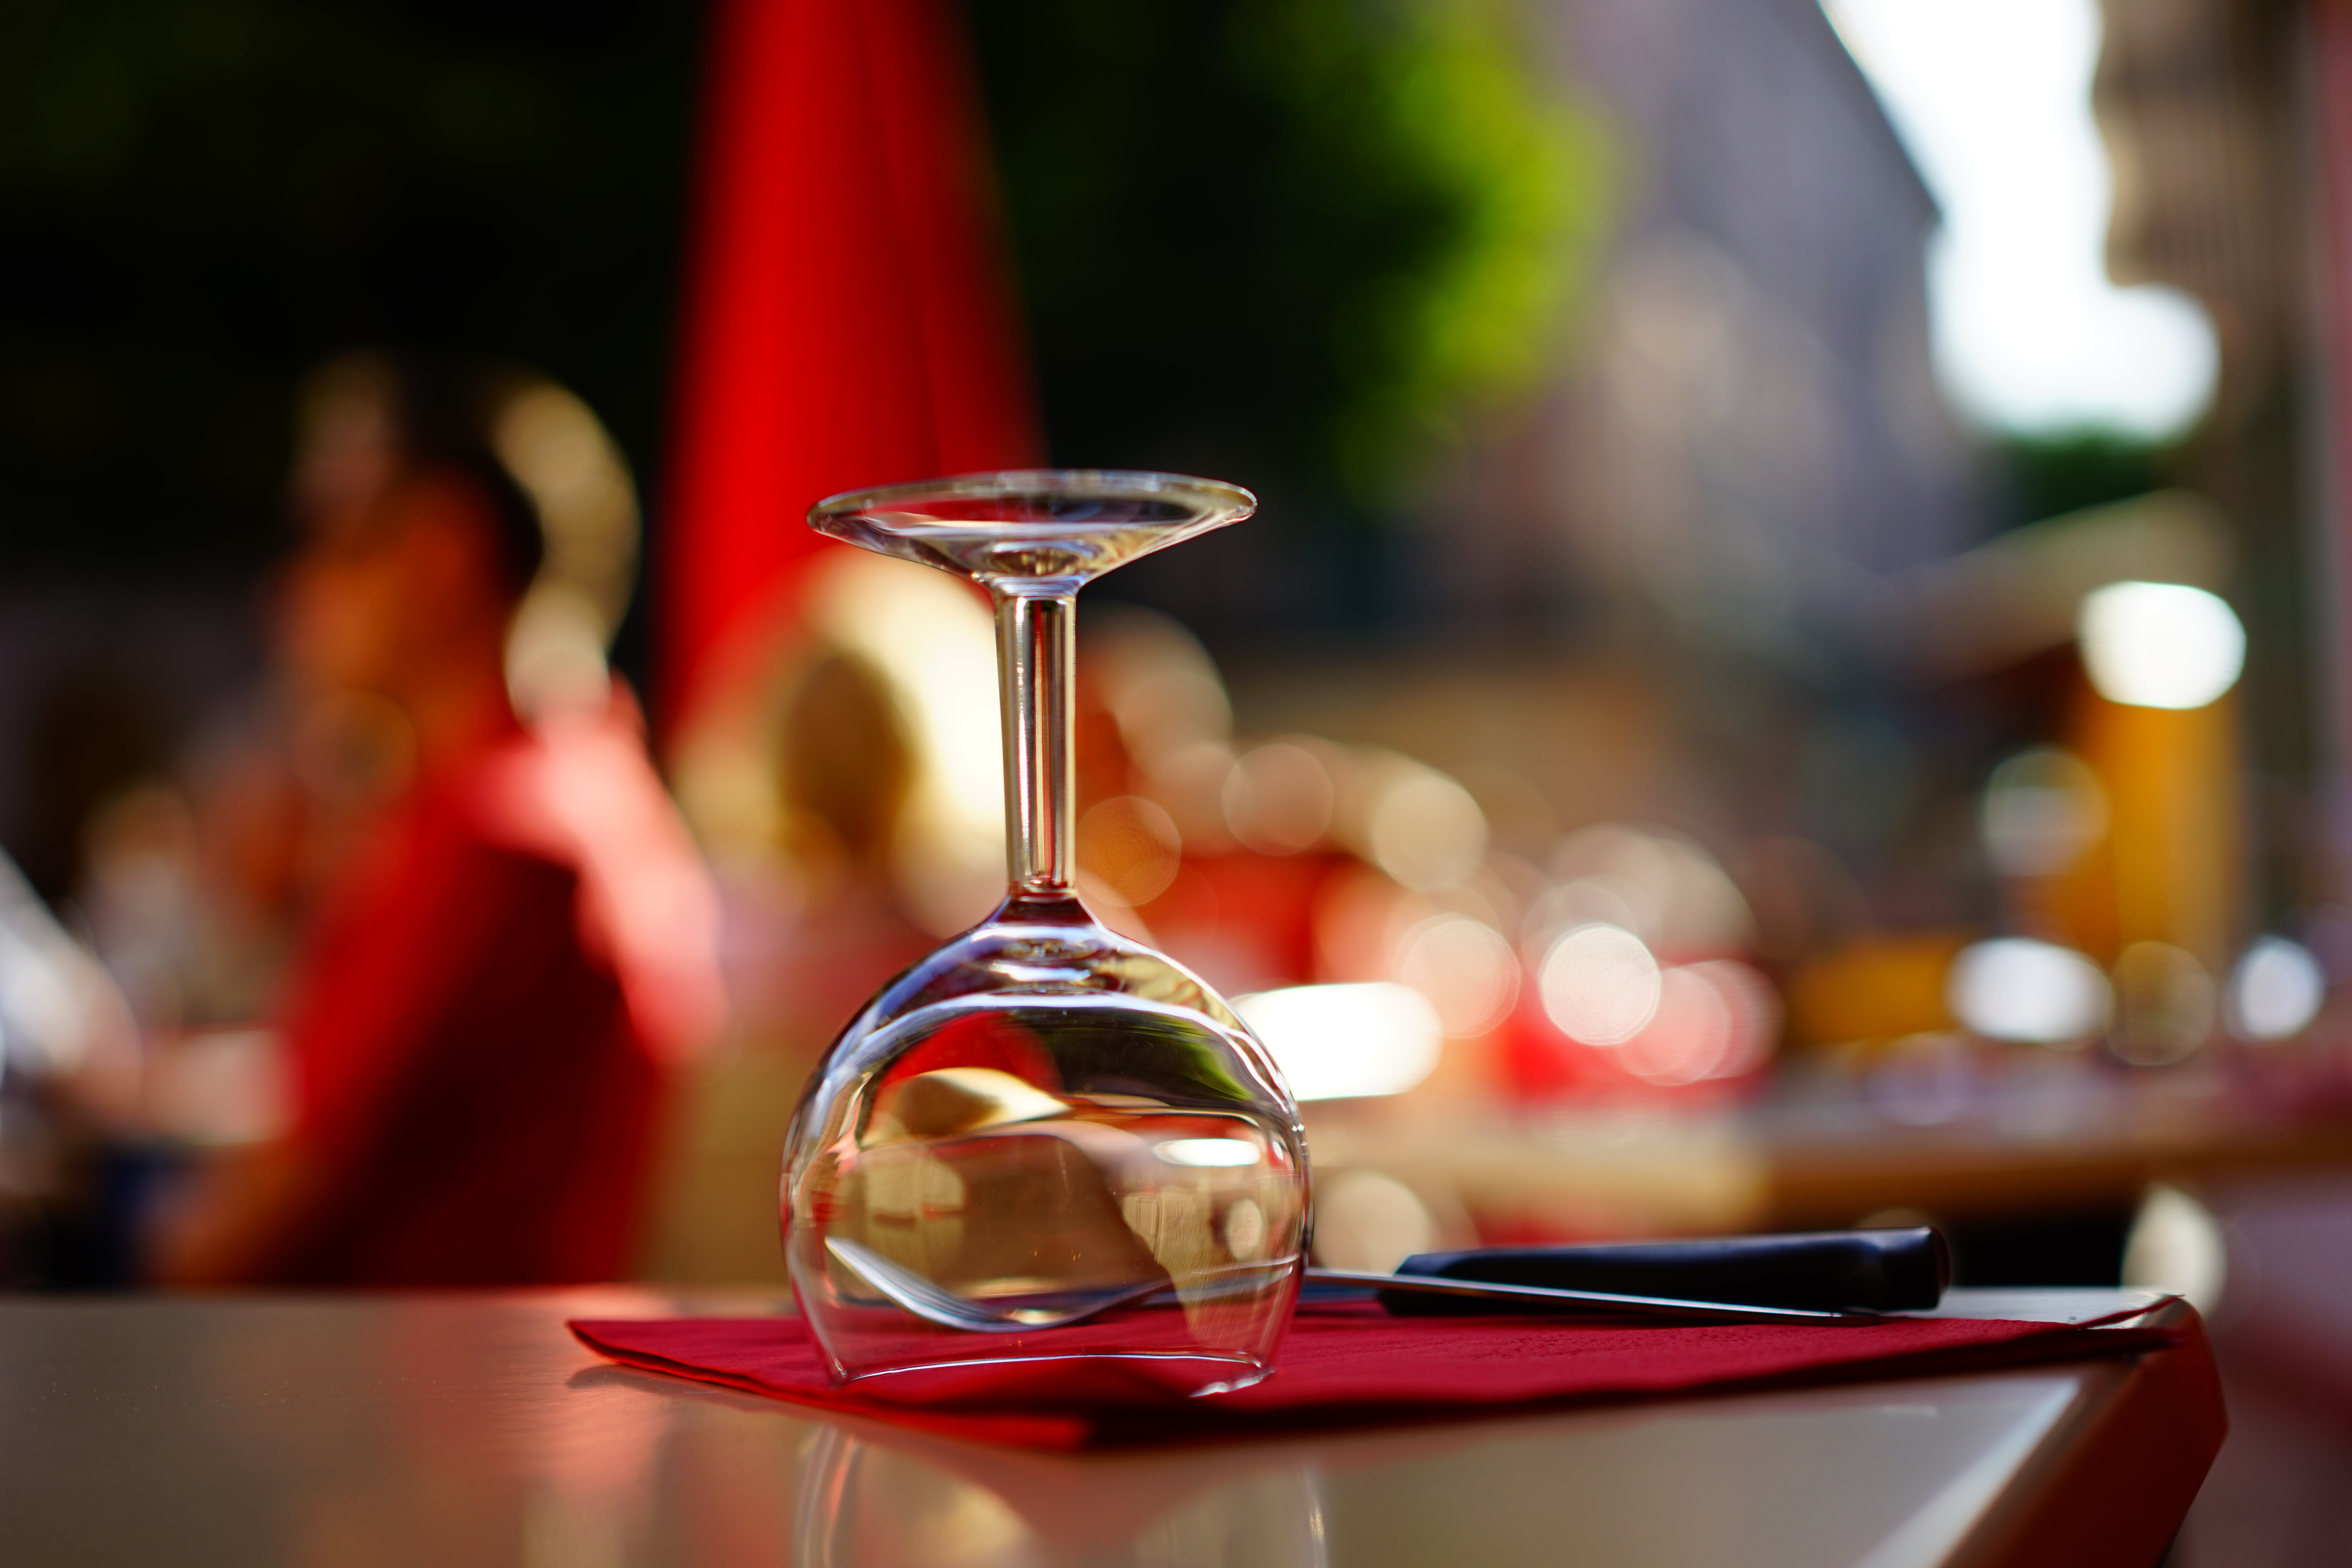 Free Images : table, cutlery, glass, red, color, covered, drink, eat ...